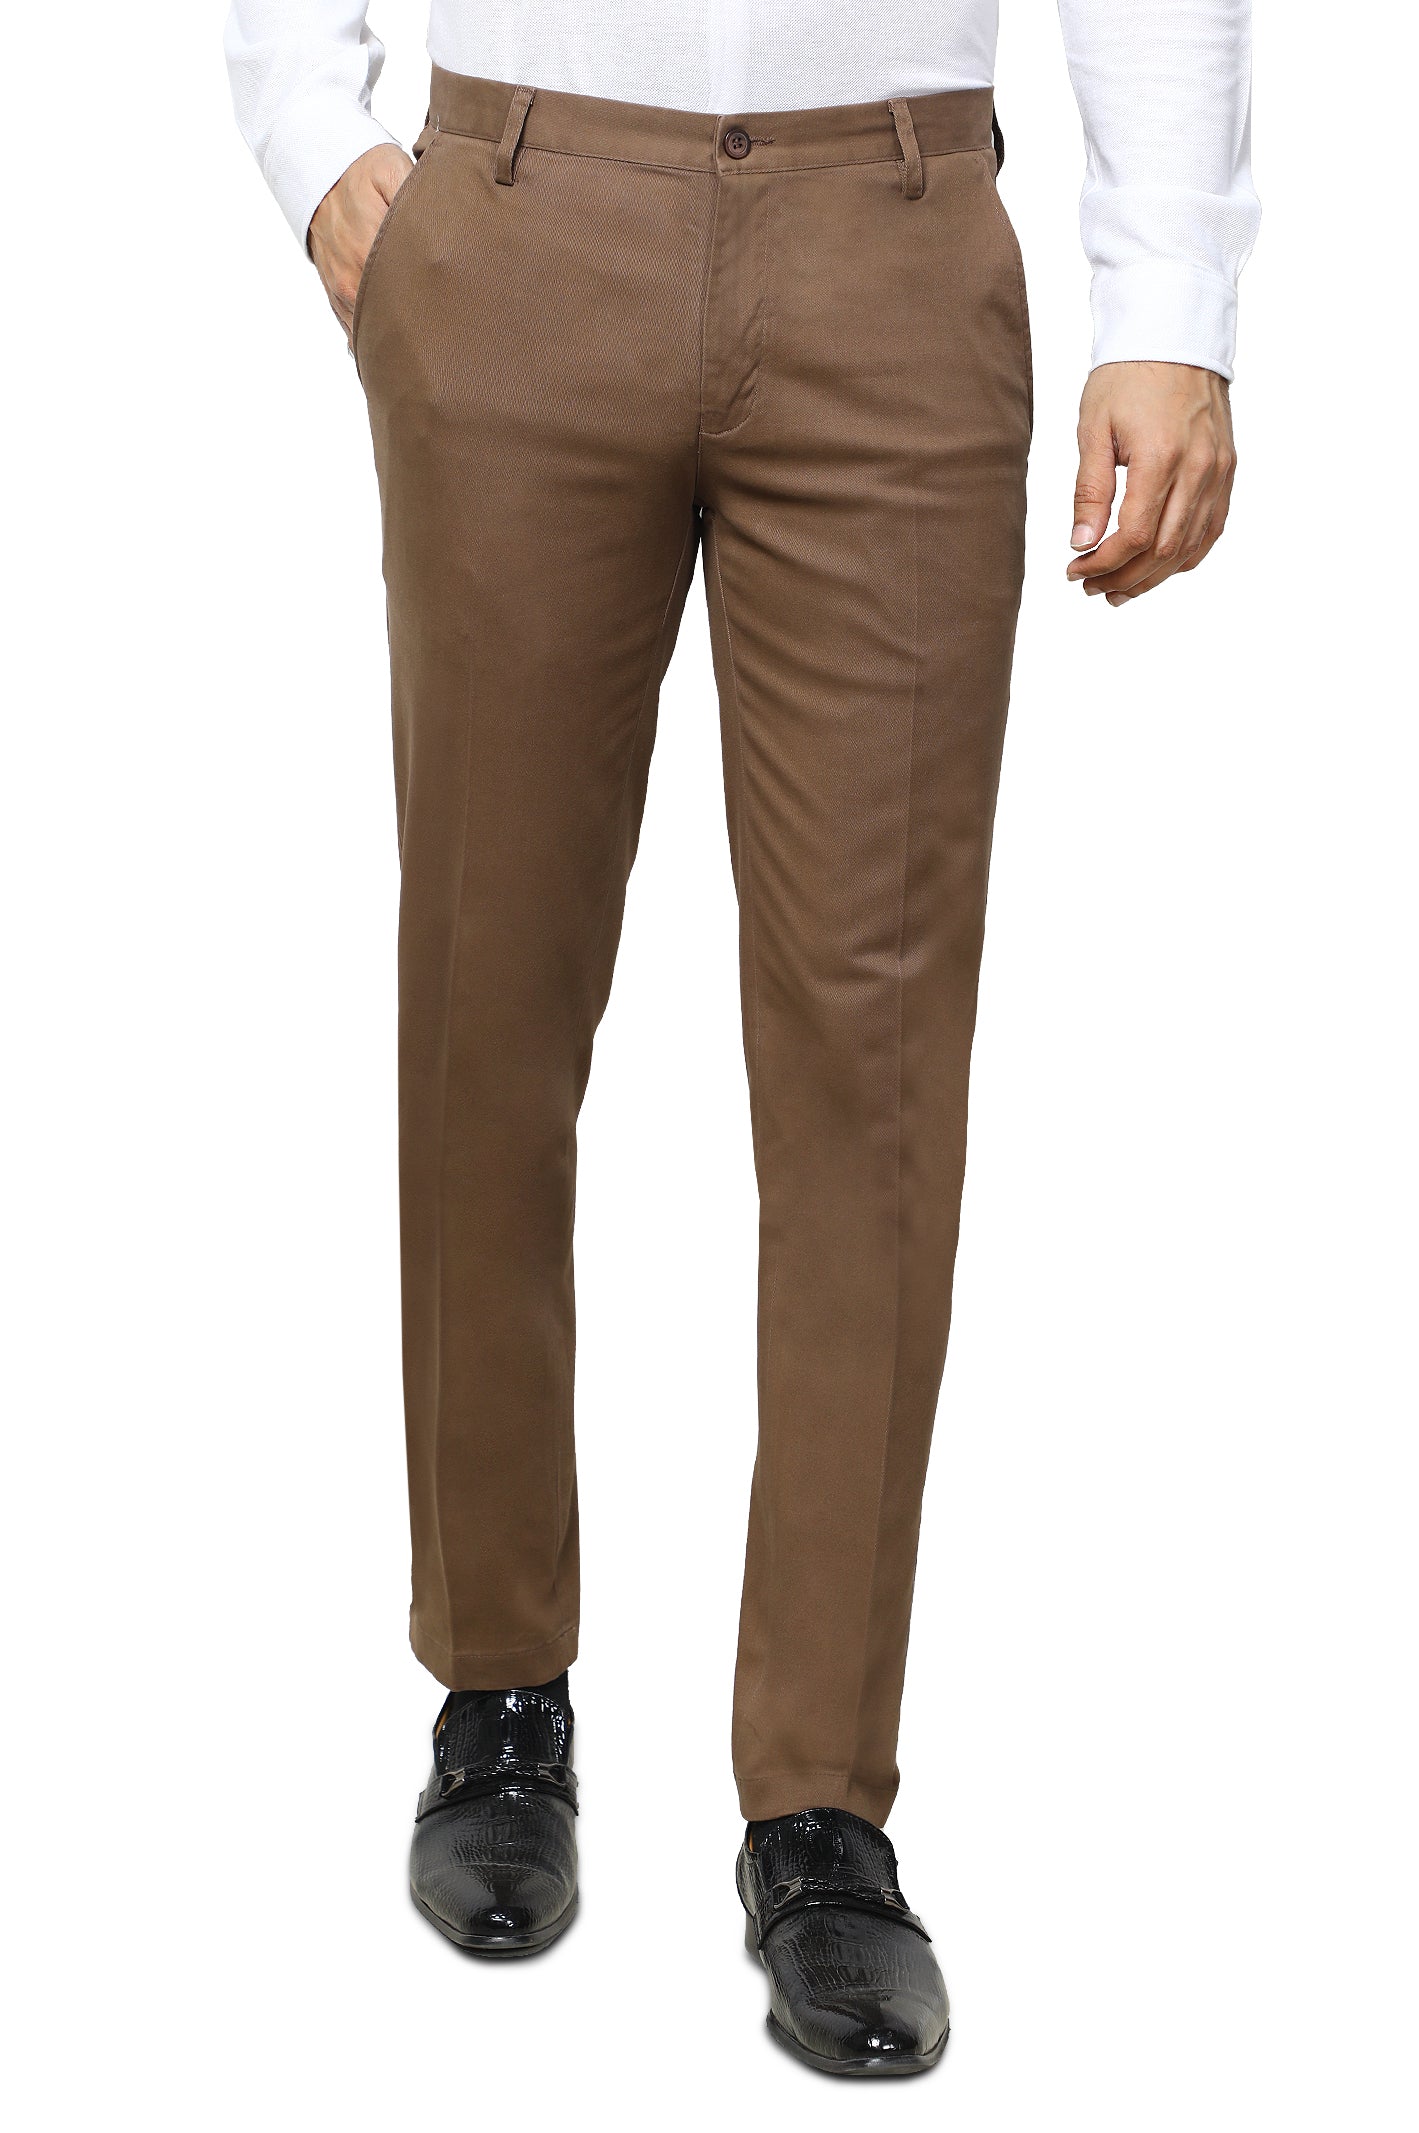 Formal Cotton Trouser for Men SKU: BH3072-C-BROWN - Diners